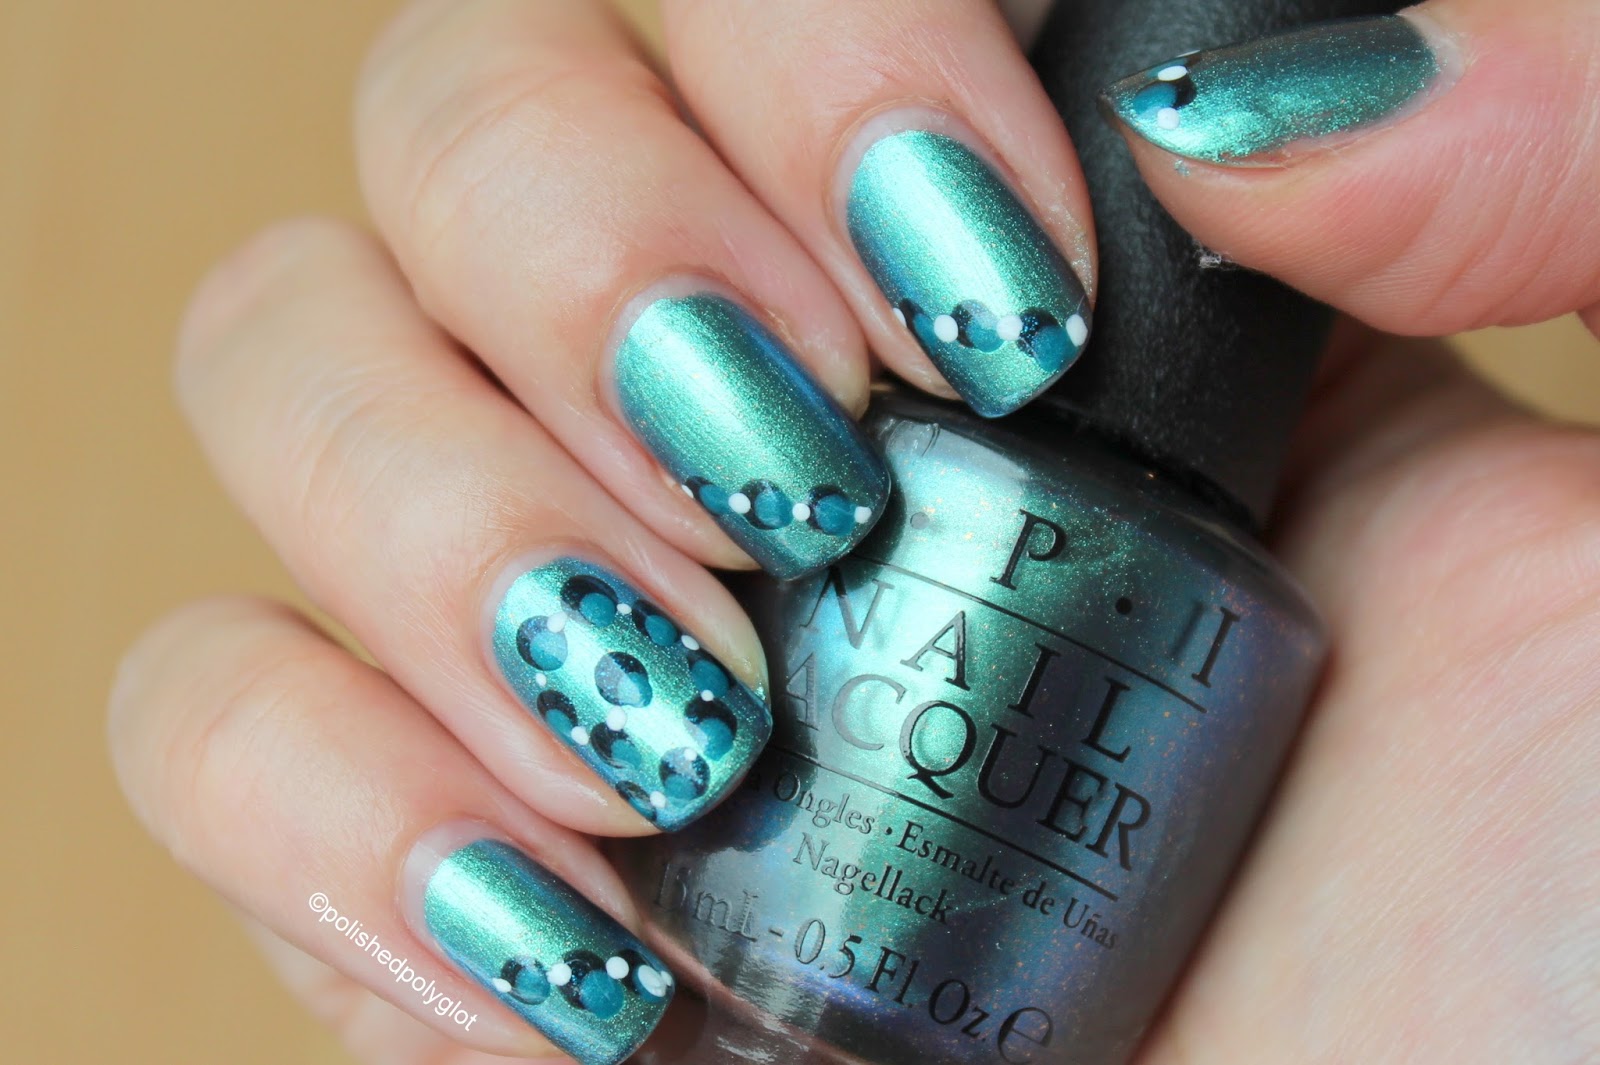 Teal Nail Art Tutorial: 10 Easy Designs for Beginners - wide 4